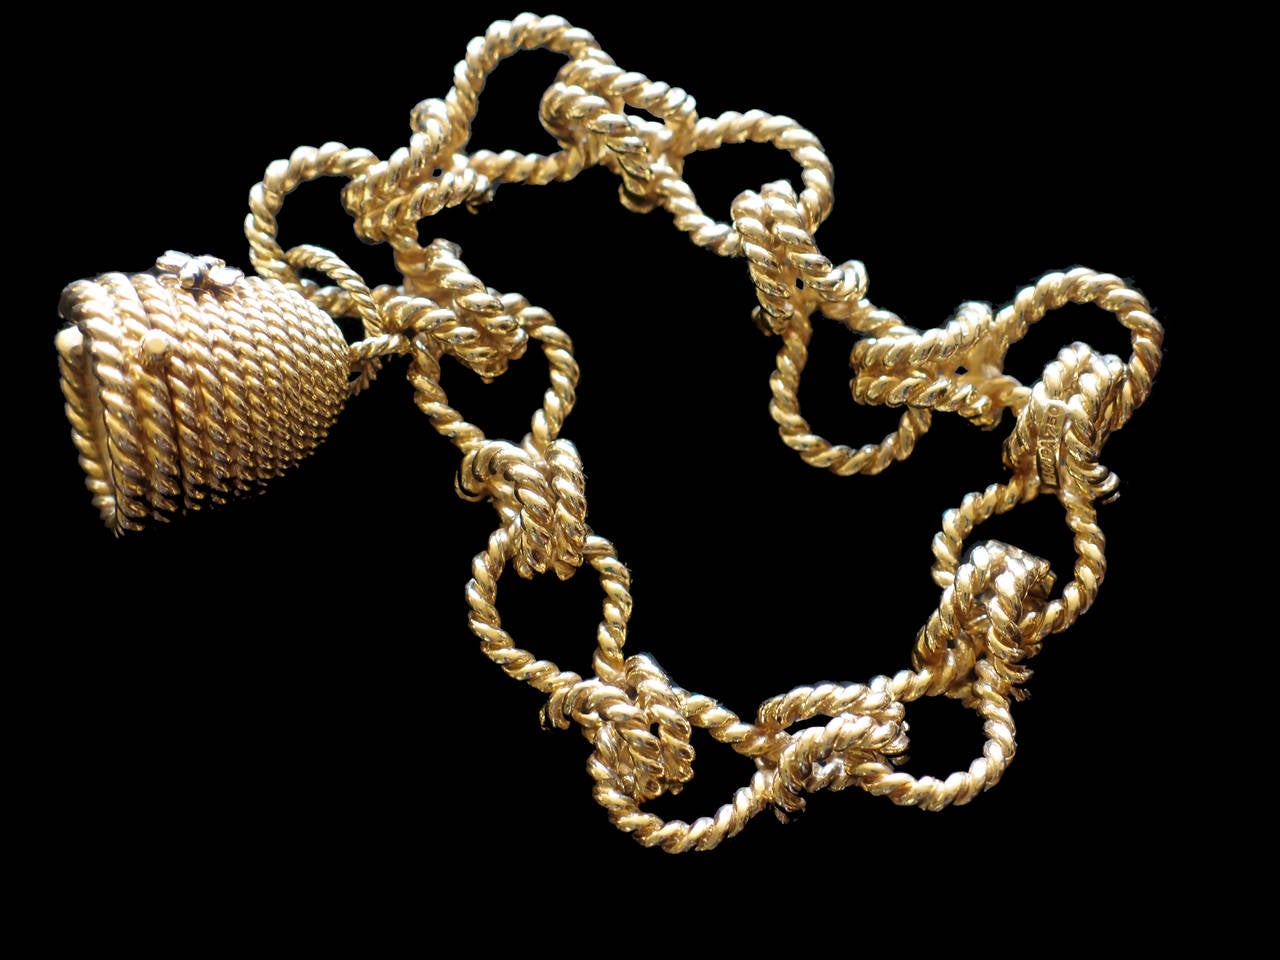 A heavy and gorgeous 18k gold rope link bracelet with an attached beehive form pendant watch.

Classic, fun and elegant.